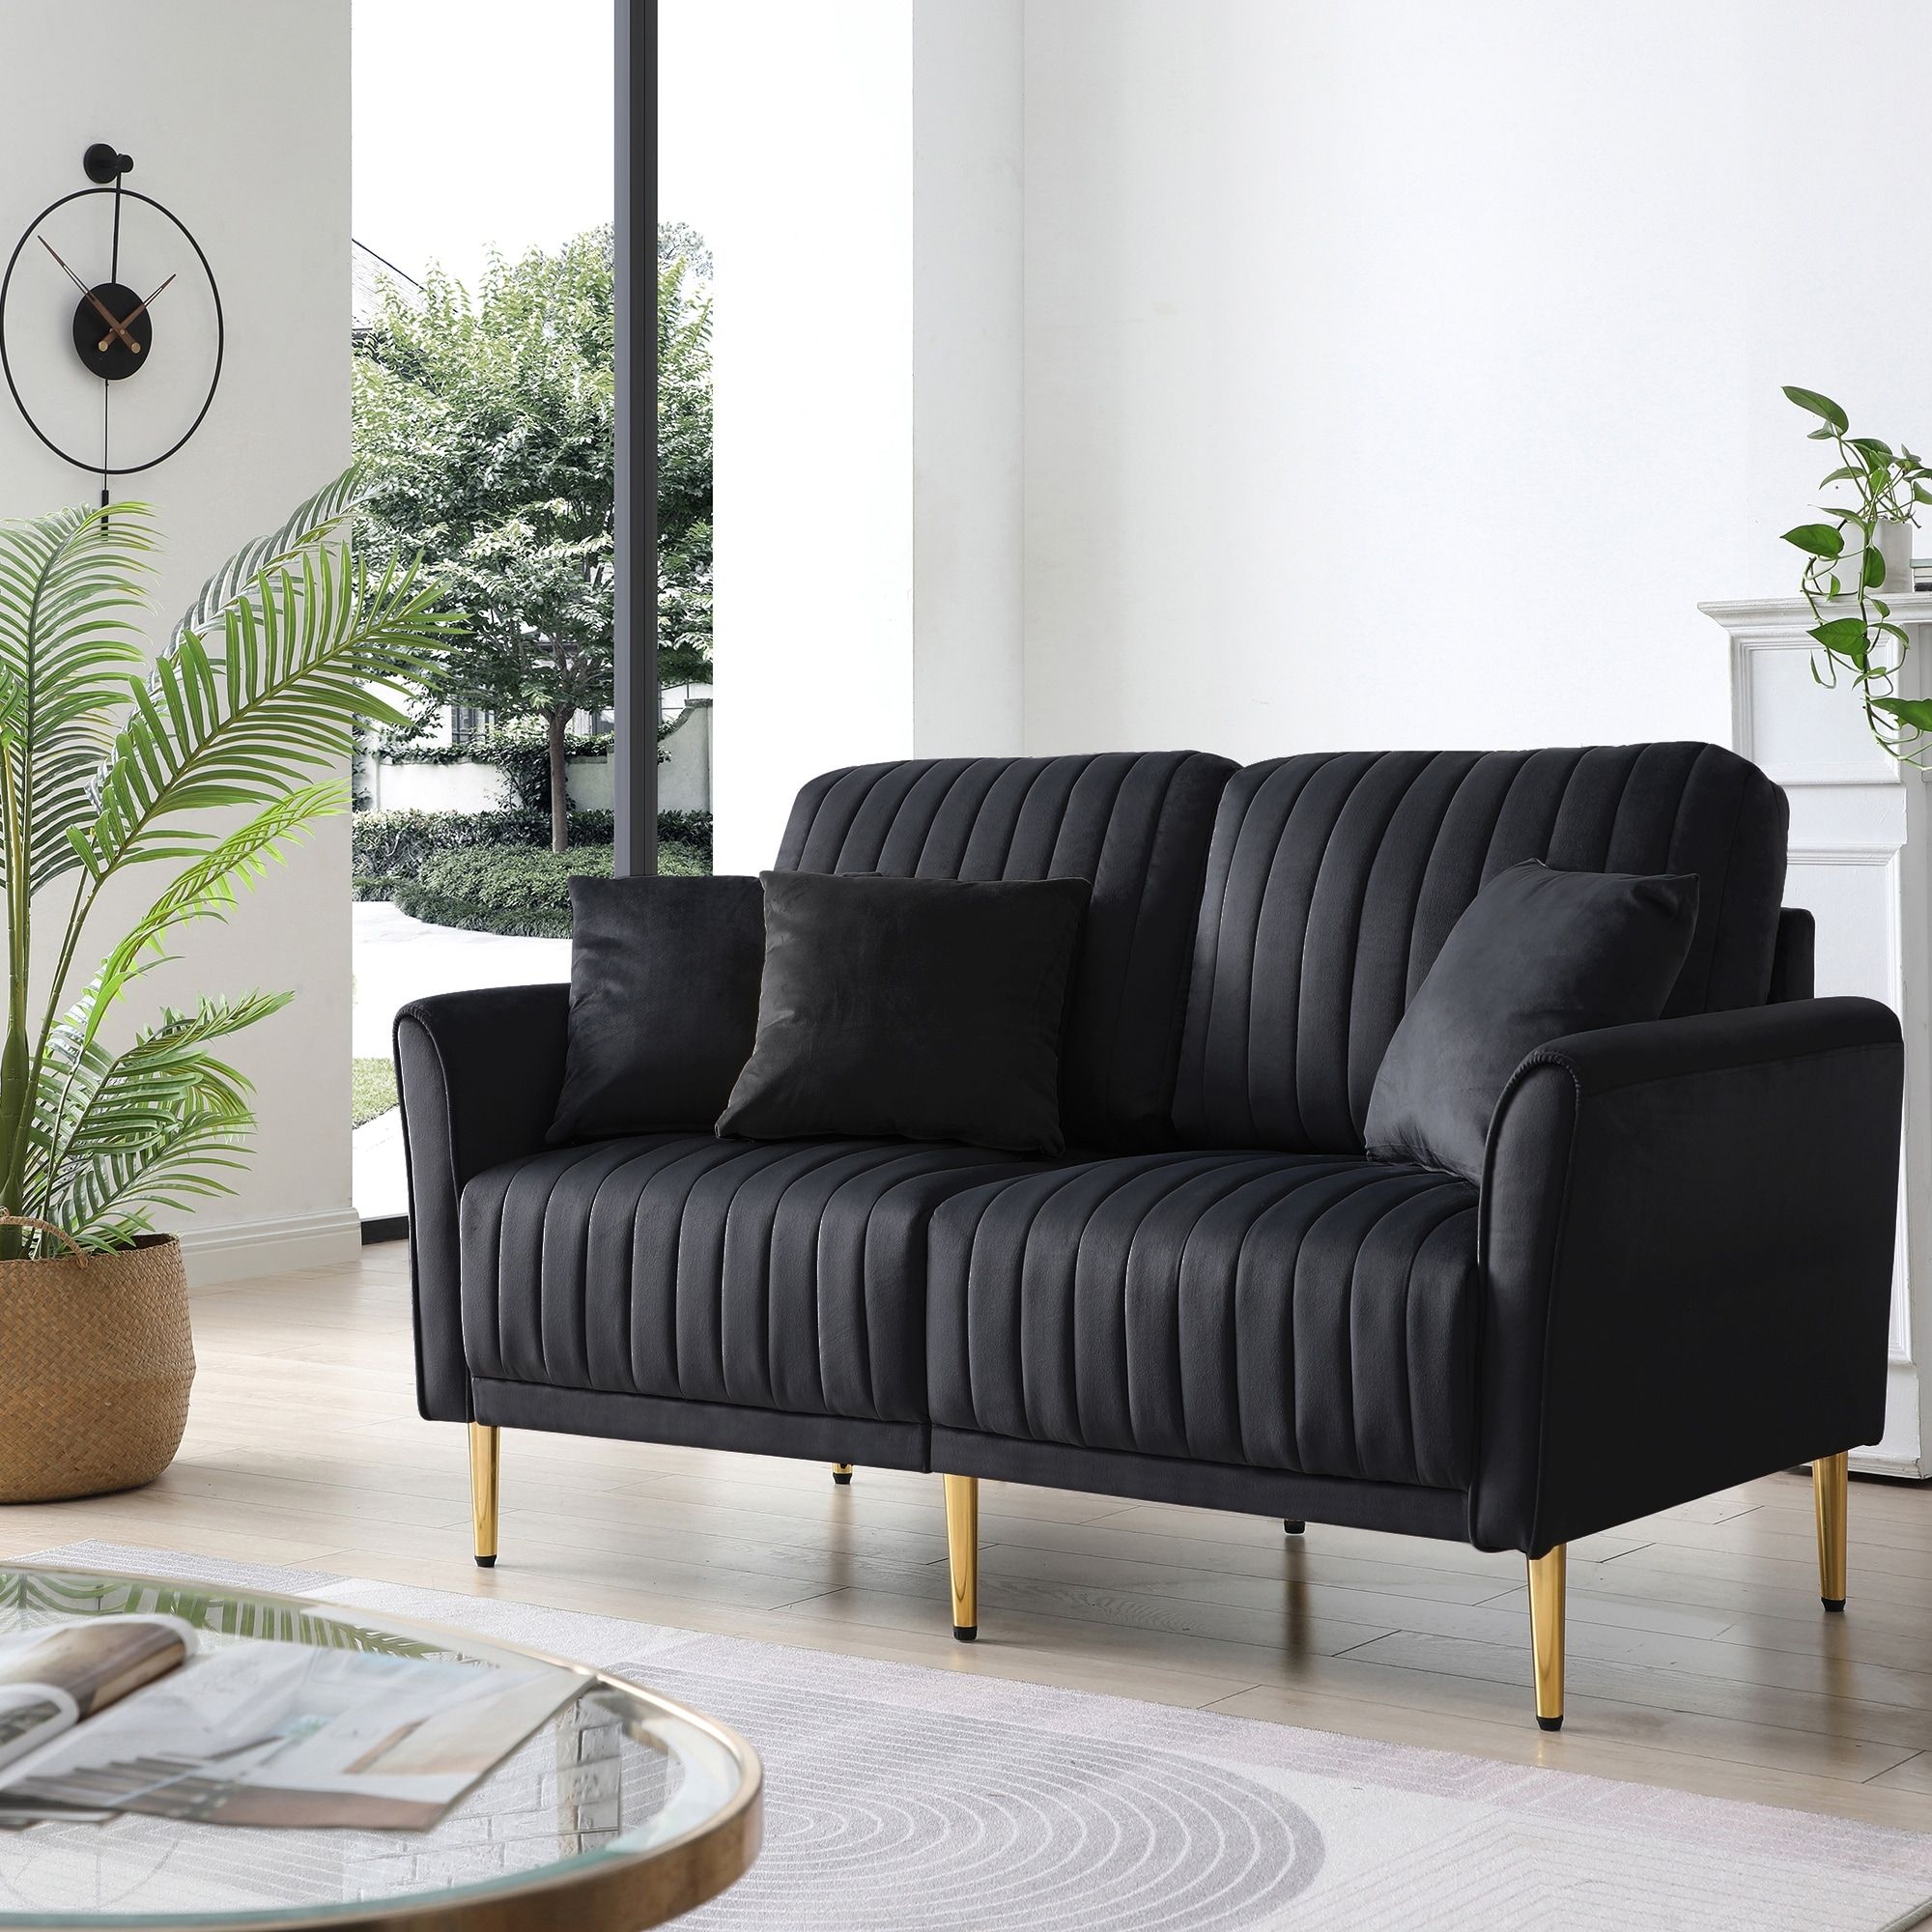 Velvet Upholstered Loveseat Sofa, Tufted Back 2 Seater Sofa Couch – On Sale  – Bed Bath & Beyond – 38314515 Within Black Velvet 2 Seater Sofa Beds (View 9 of 15)